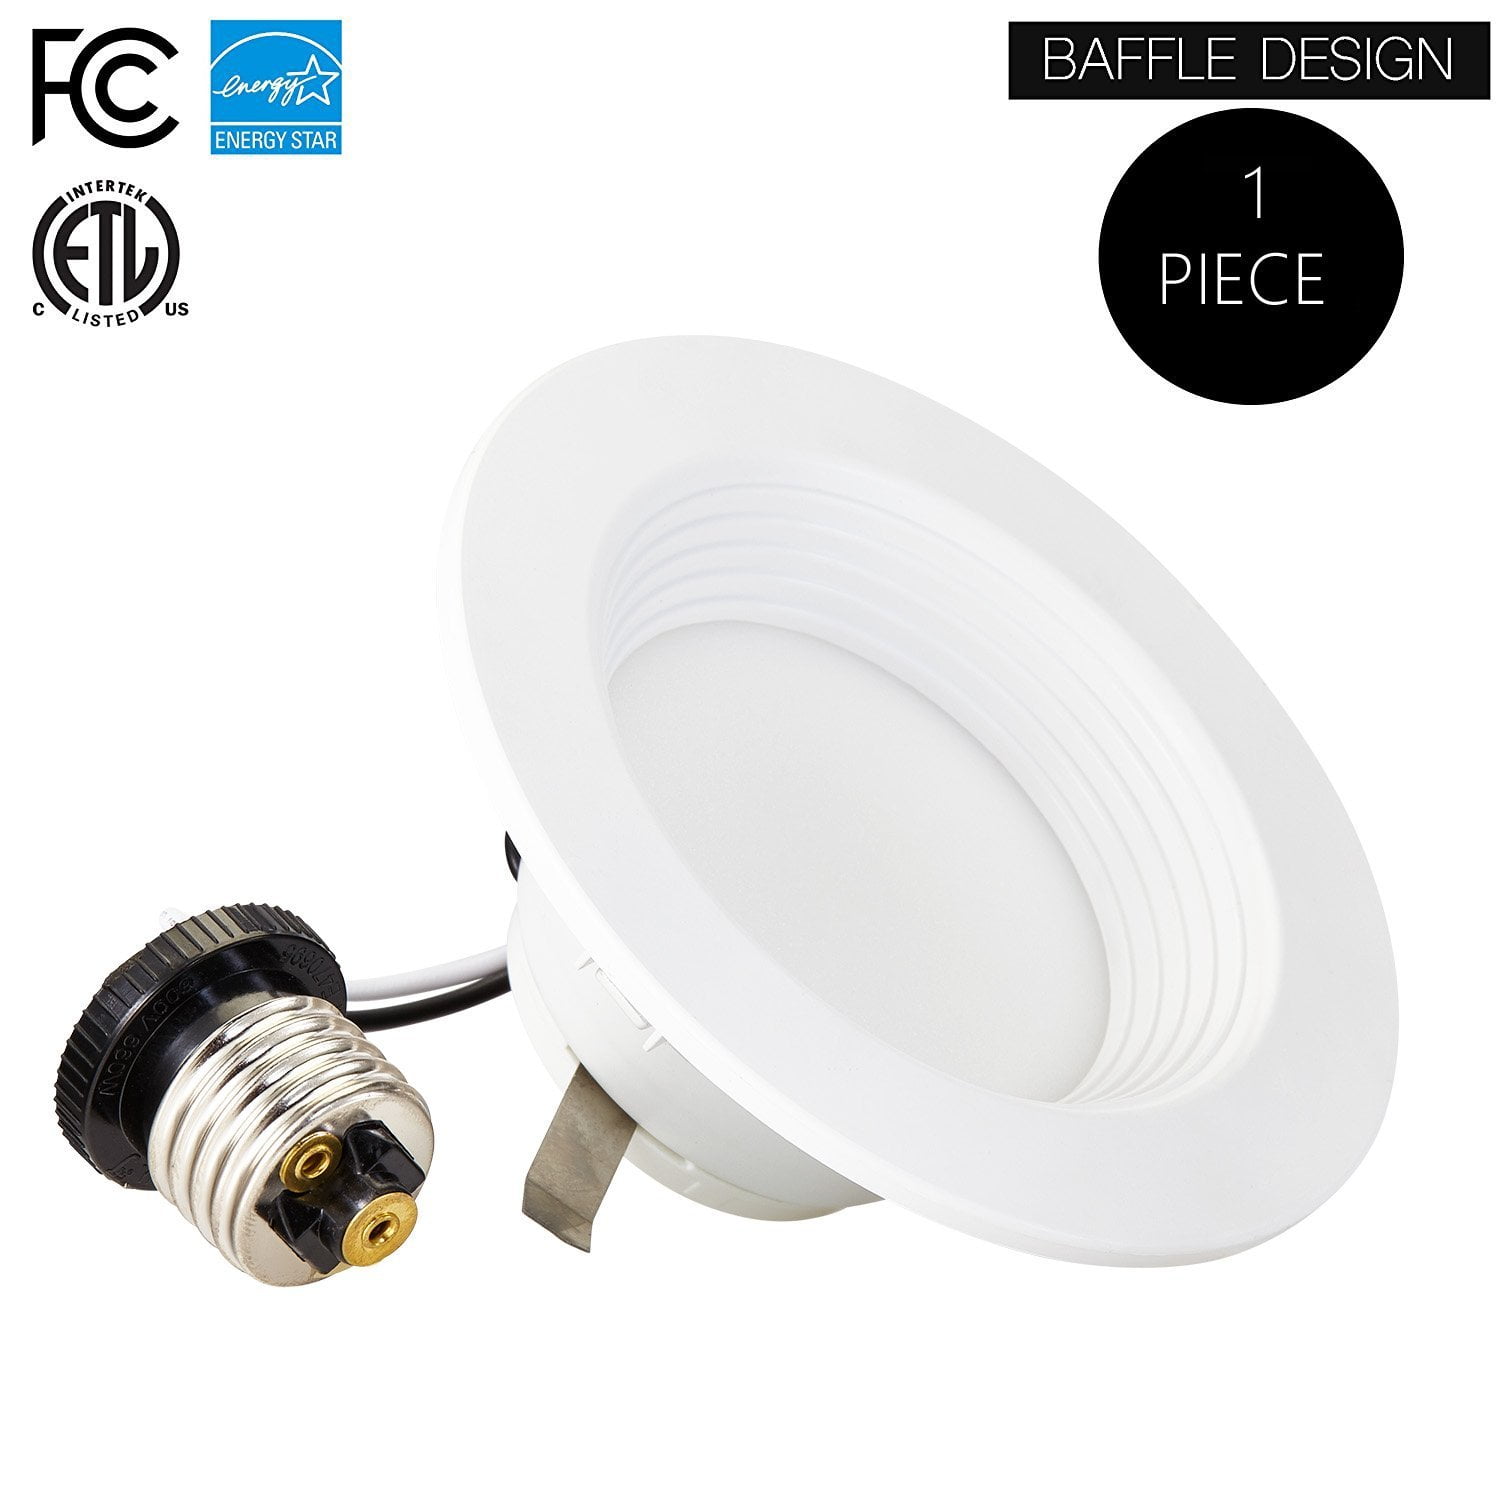 4 Inch LED Downlight 9W Dimmable 4" Trim Baffle Recessed Retrofit Ceiling Light 